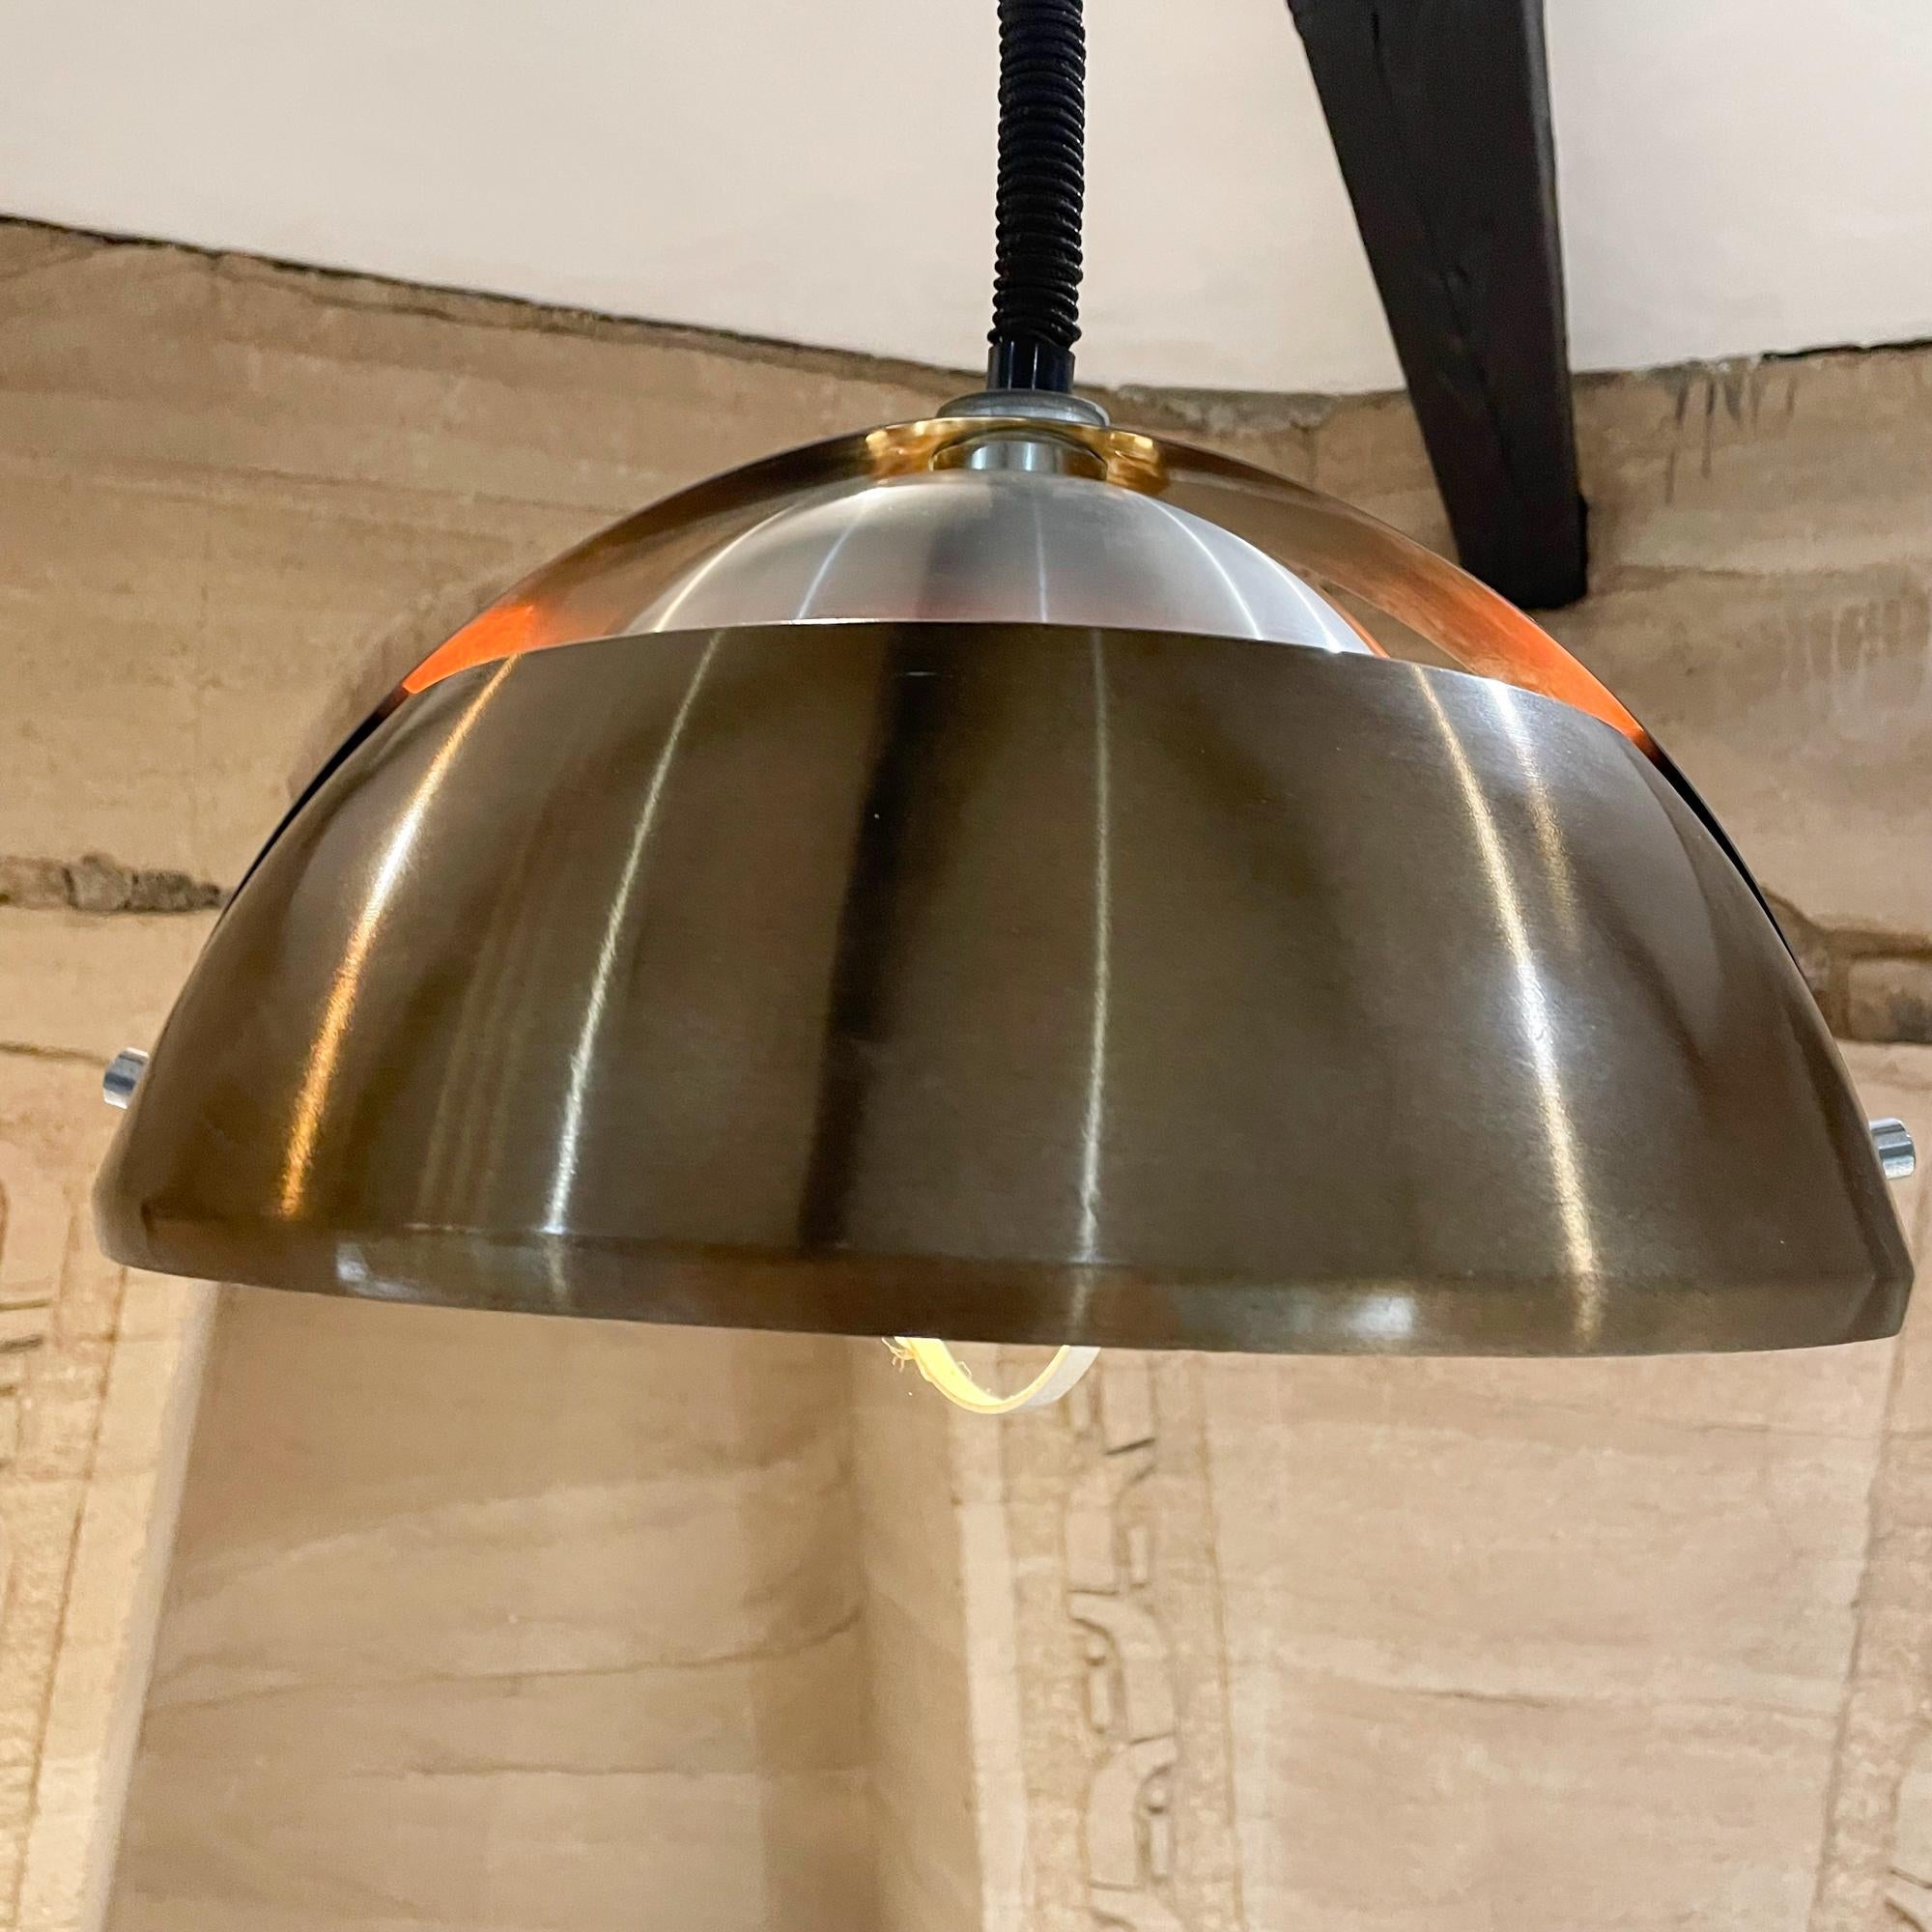 Meblo Guzzini Space Age pendant lamp in brown orange & stainless chrome multi layered shades.
Made Italy 1970s
Unmarked. In the design style of Meblo and Harvey Guzzini.
Measures: 15 diameter x 9 tall 27 tall and 63.5 long fully extended
Style